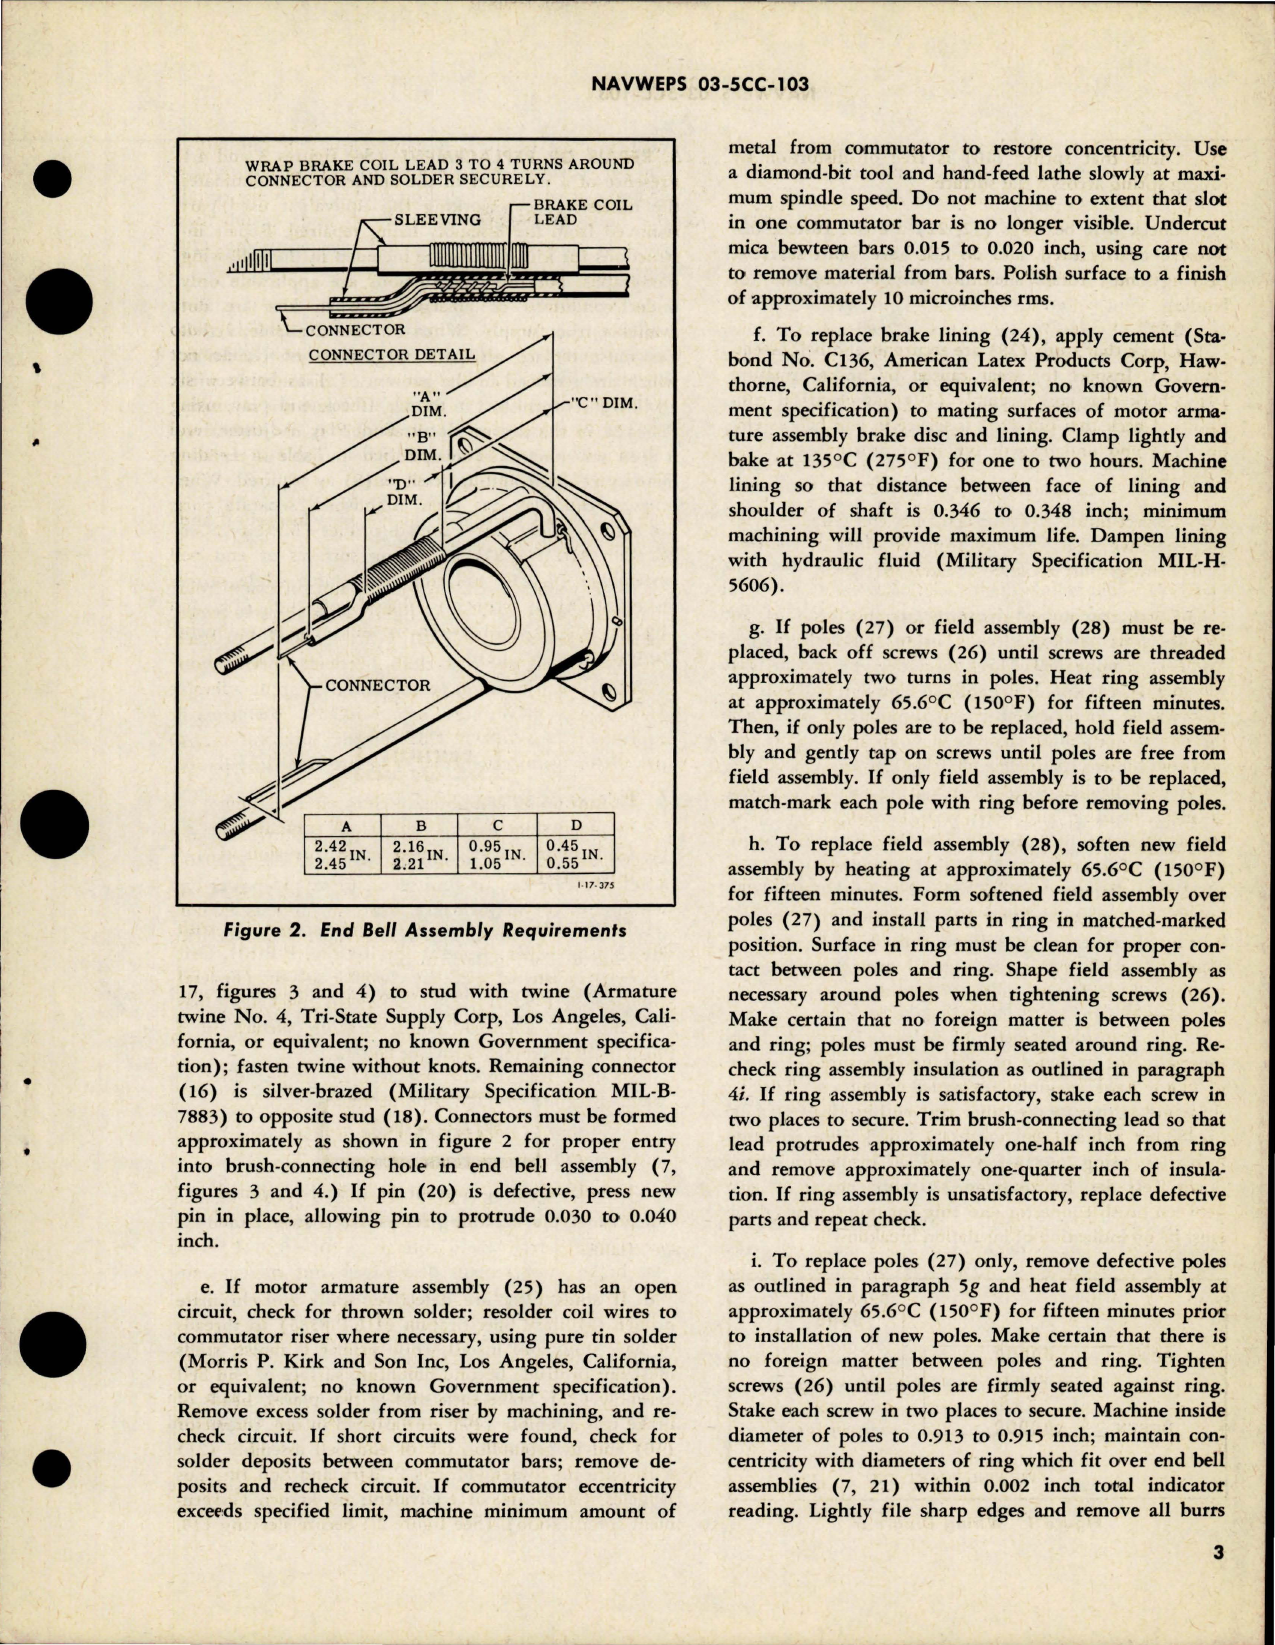 Sample page 5 from AirCorps Library document: Overhaul Instructions with Parts Breakdown for Direct Current Motors - Parts 36702, 36702-2 